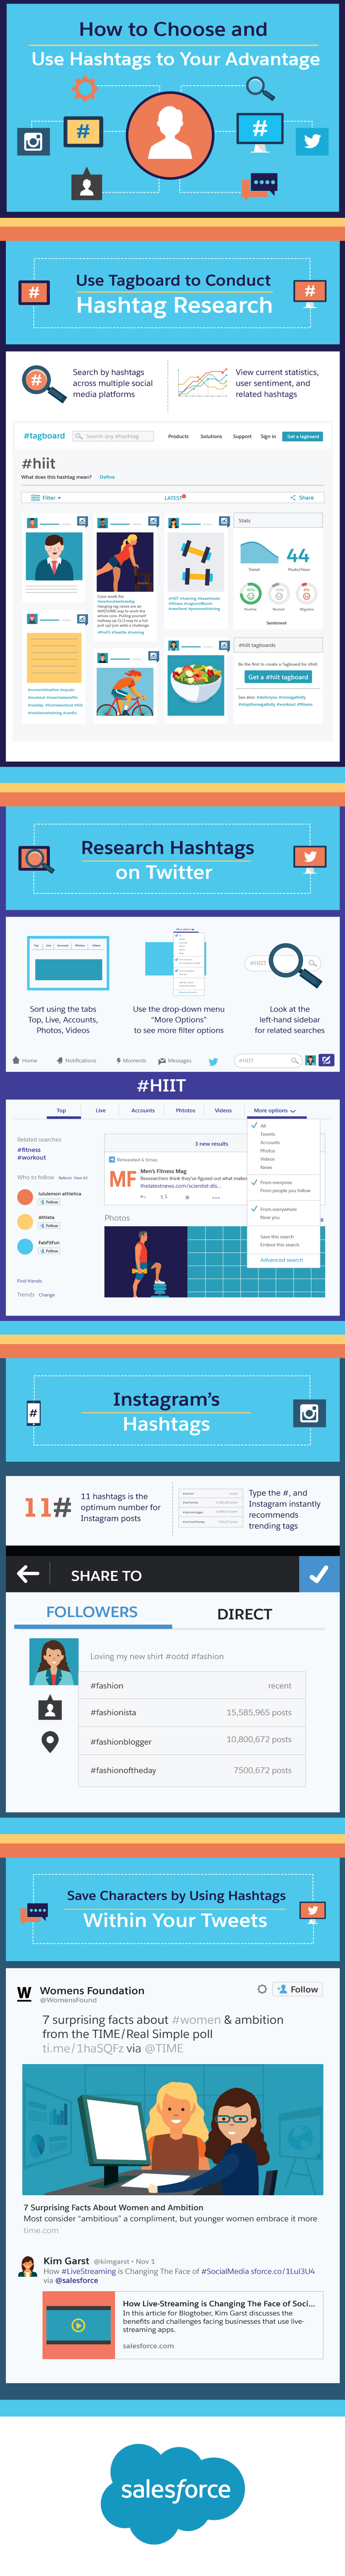 How to Choose and Use Hashtags to Your Advantage